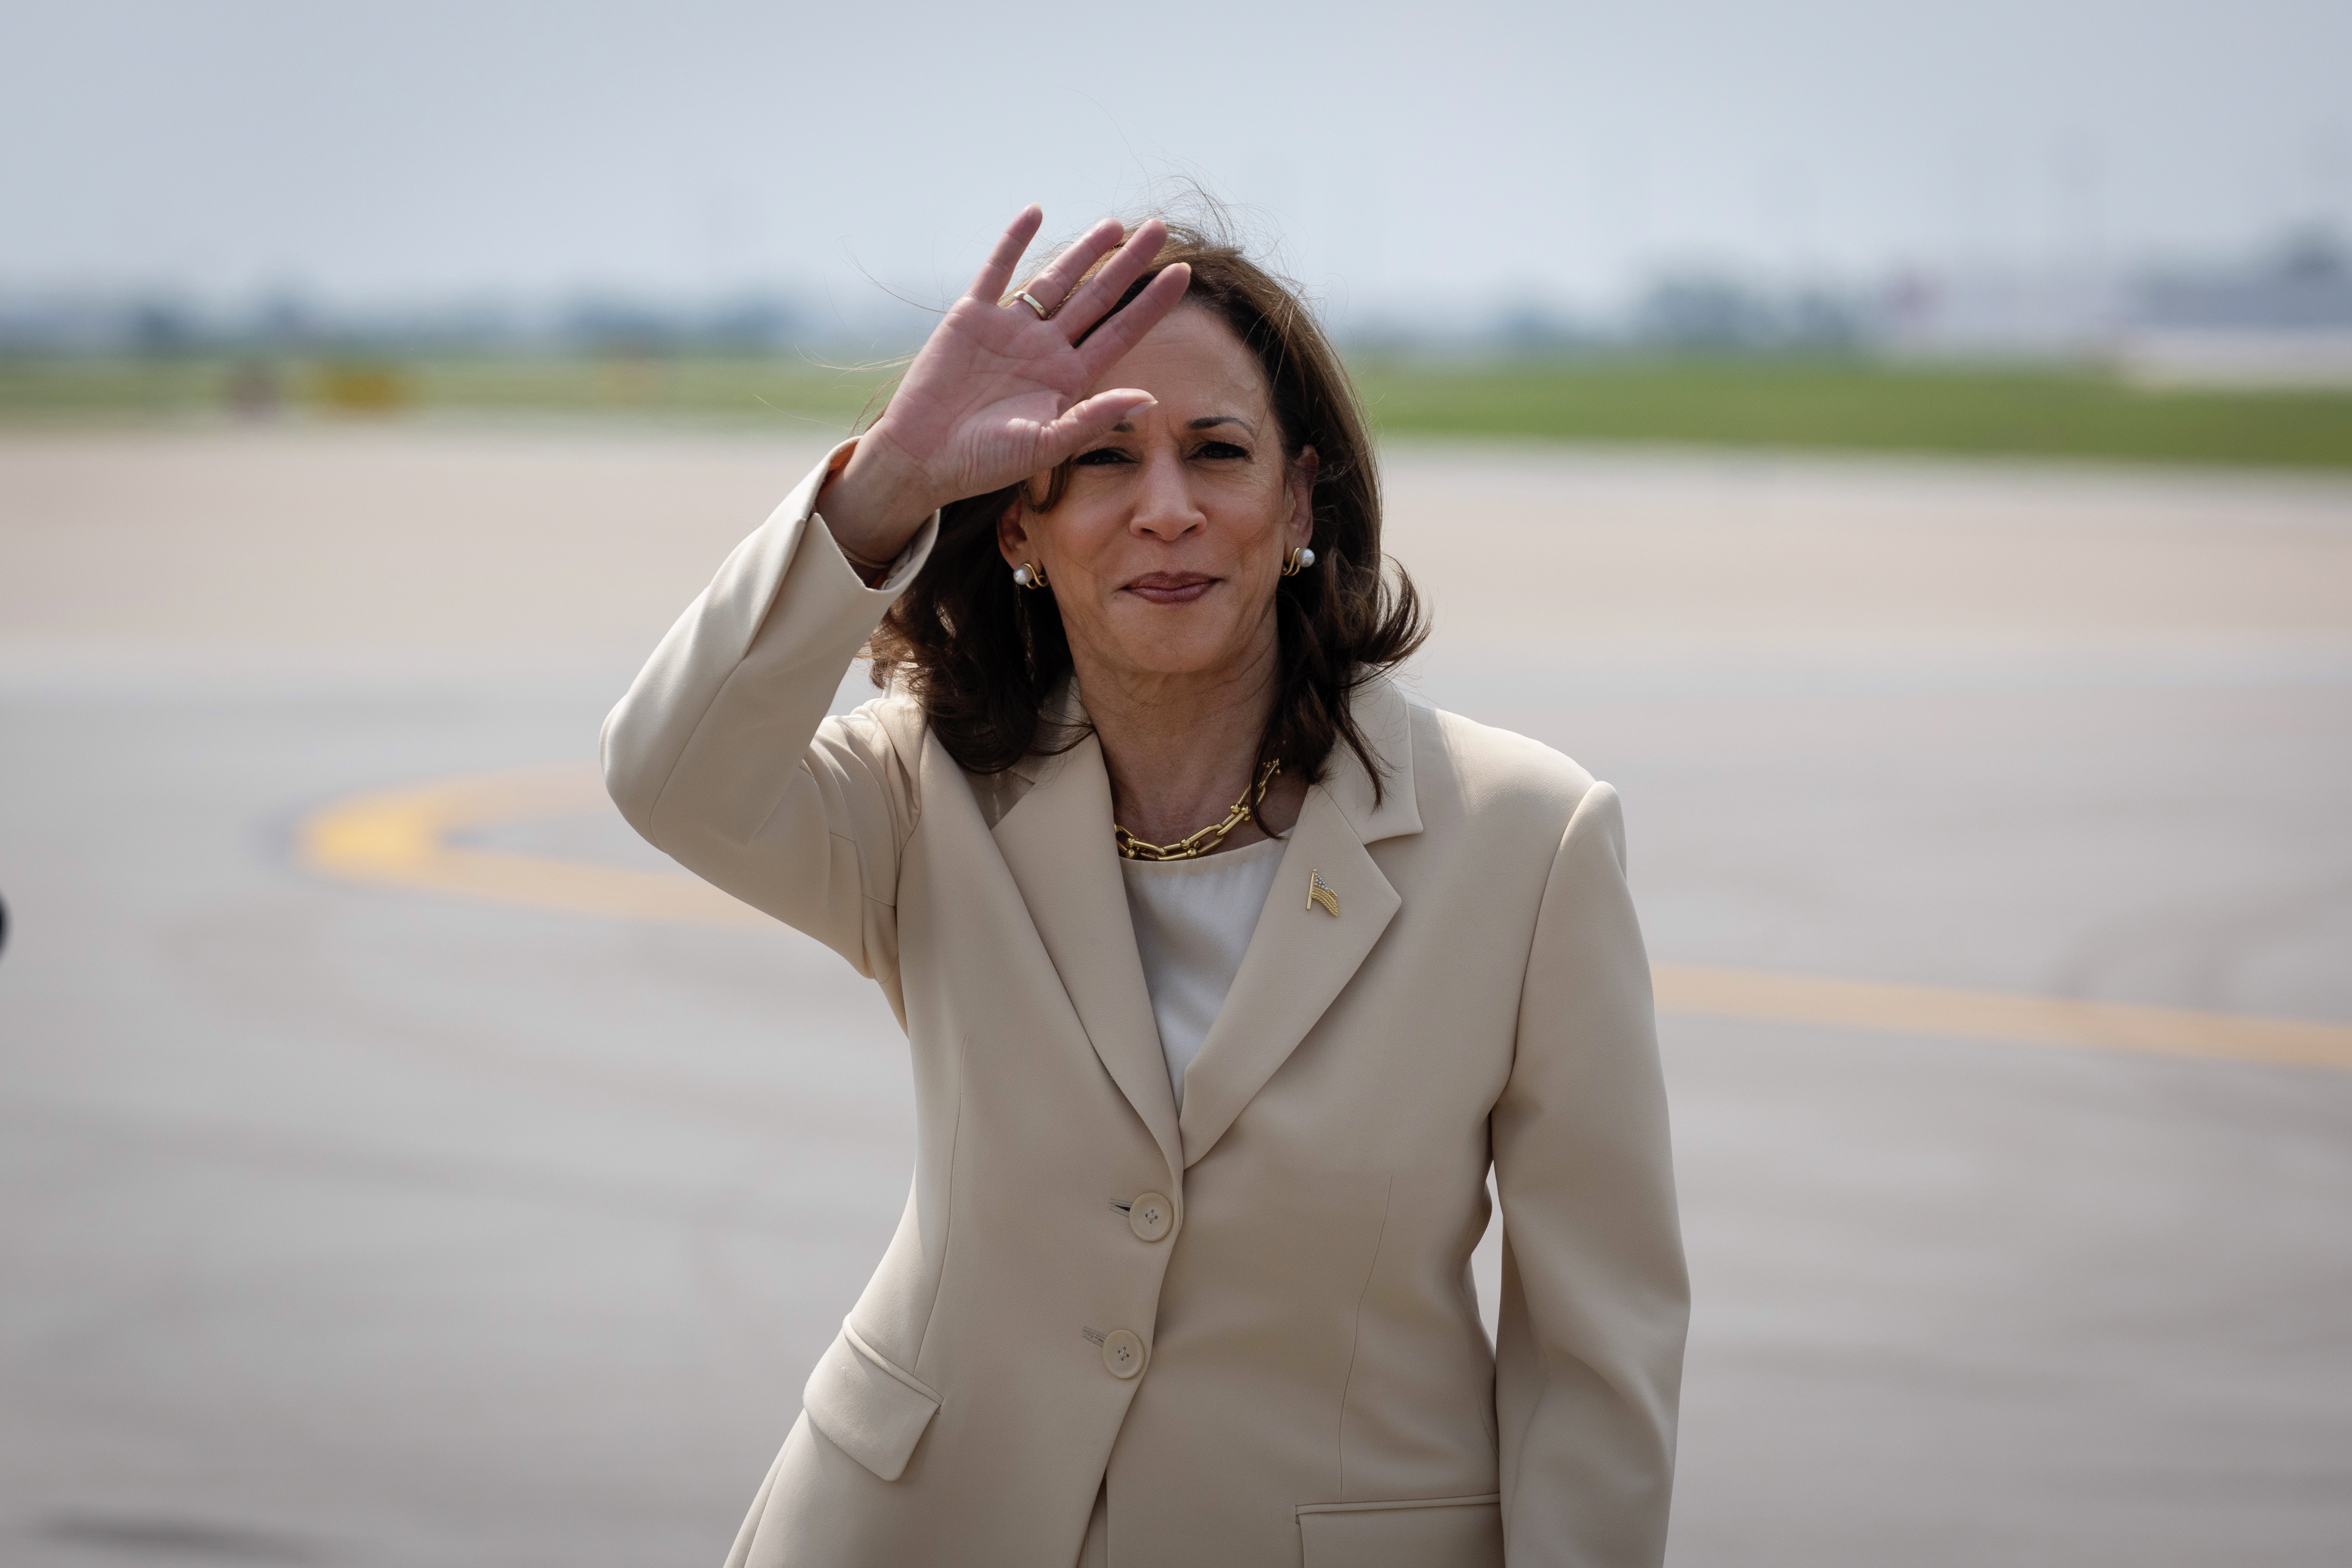 Will All Criticism Toward Kamala Be Labeled 'Racist?'